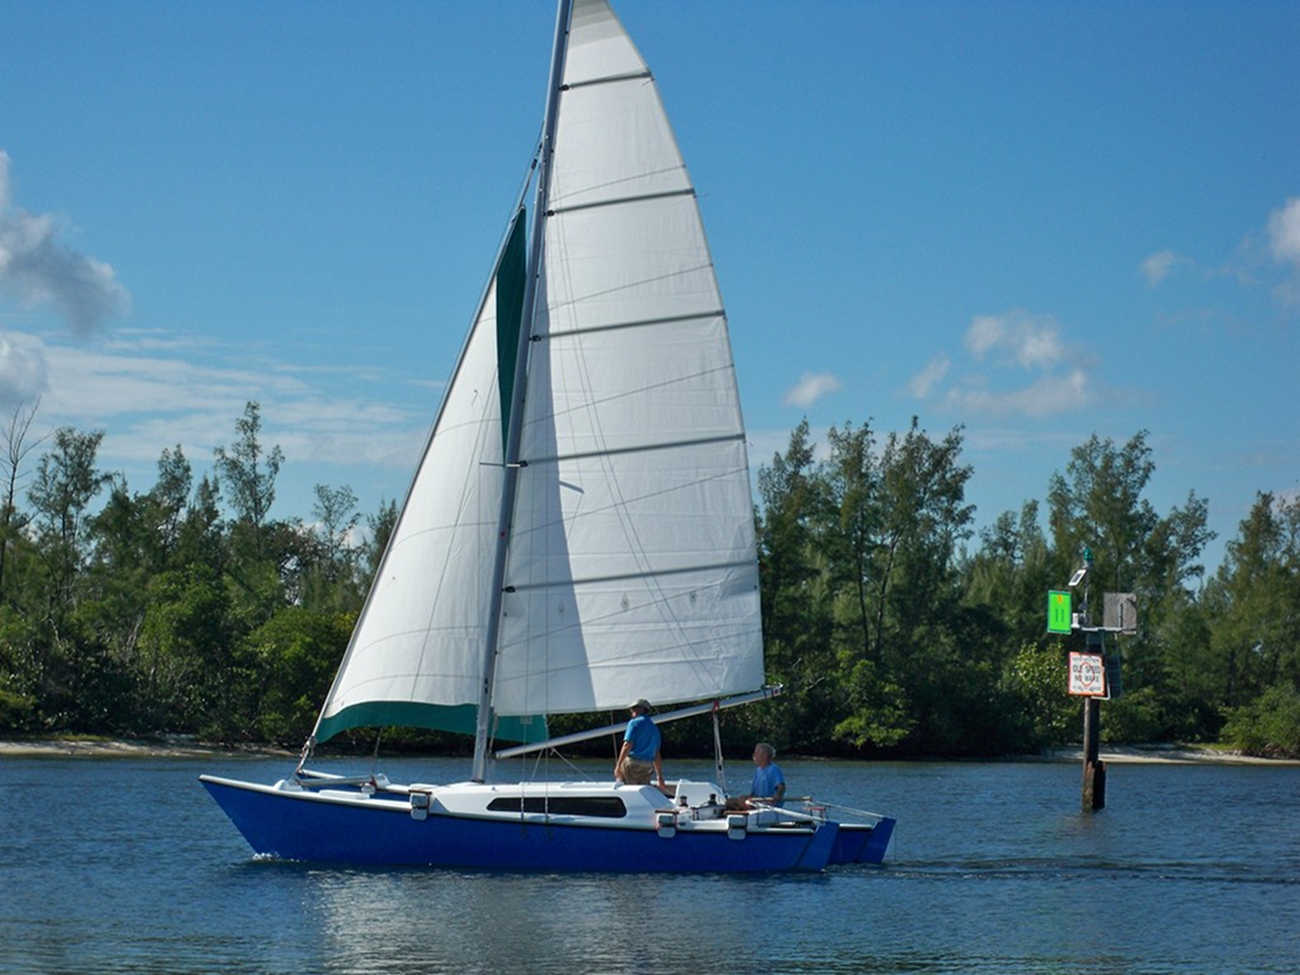 Blue Tiki 8m sailed by two people, trees in background